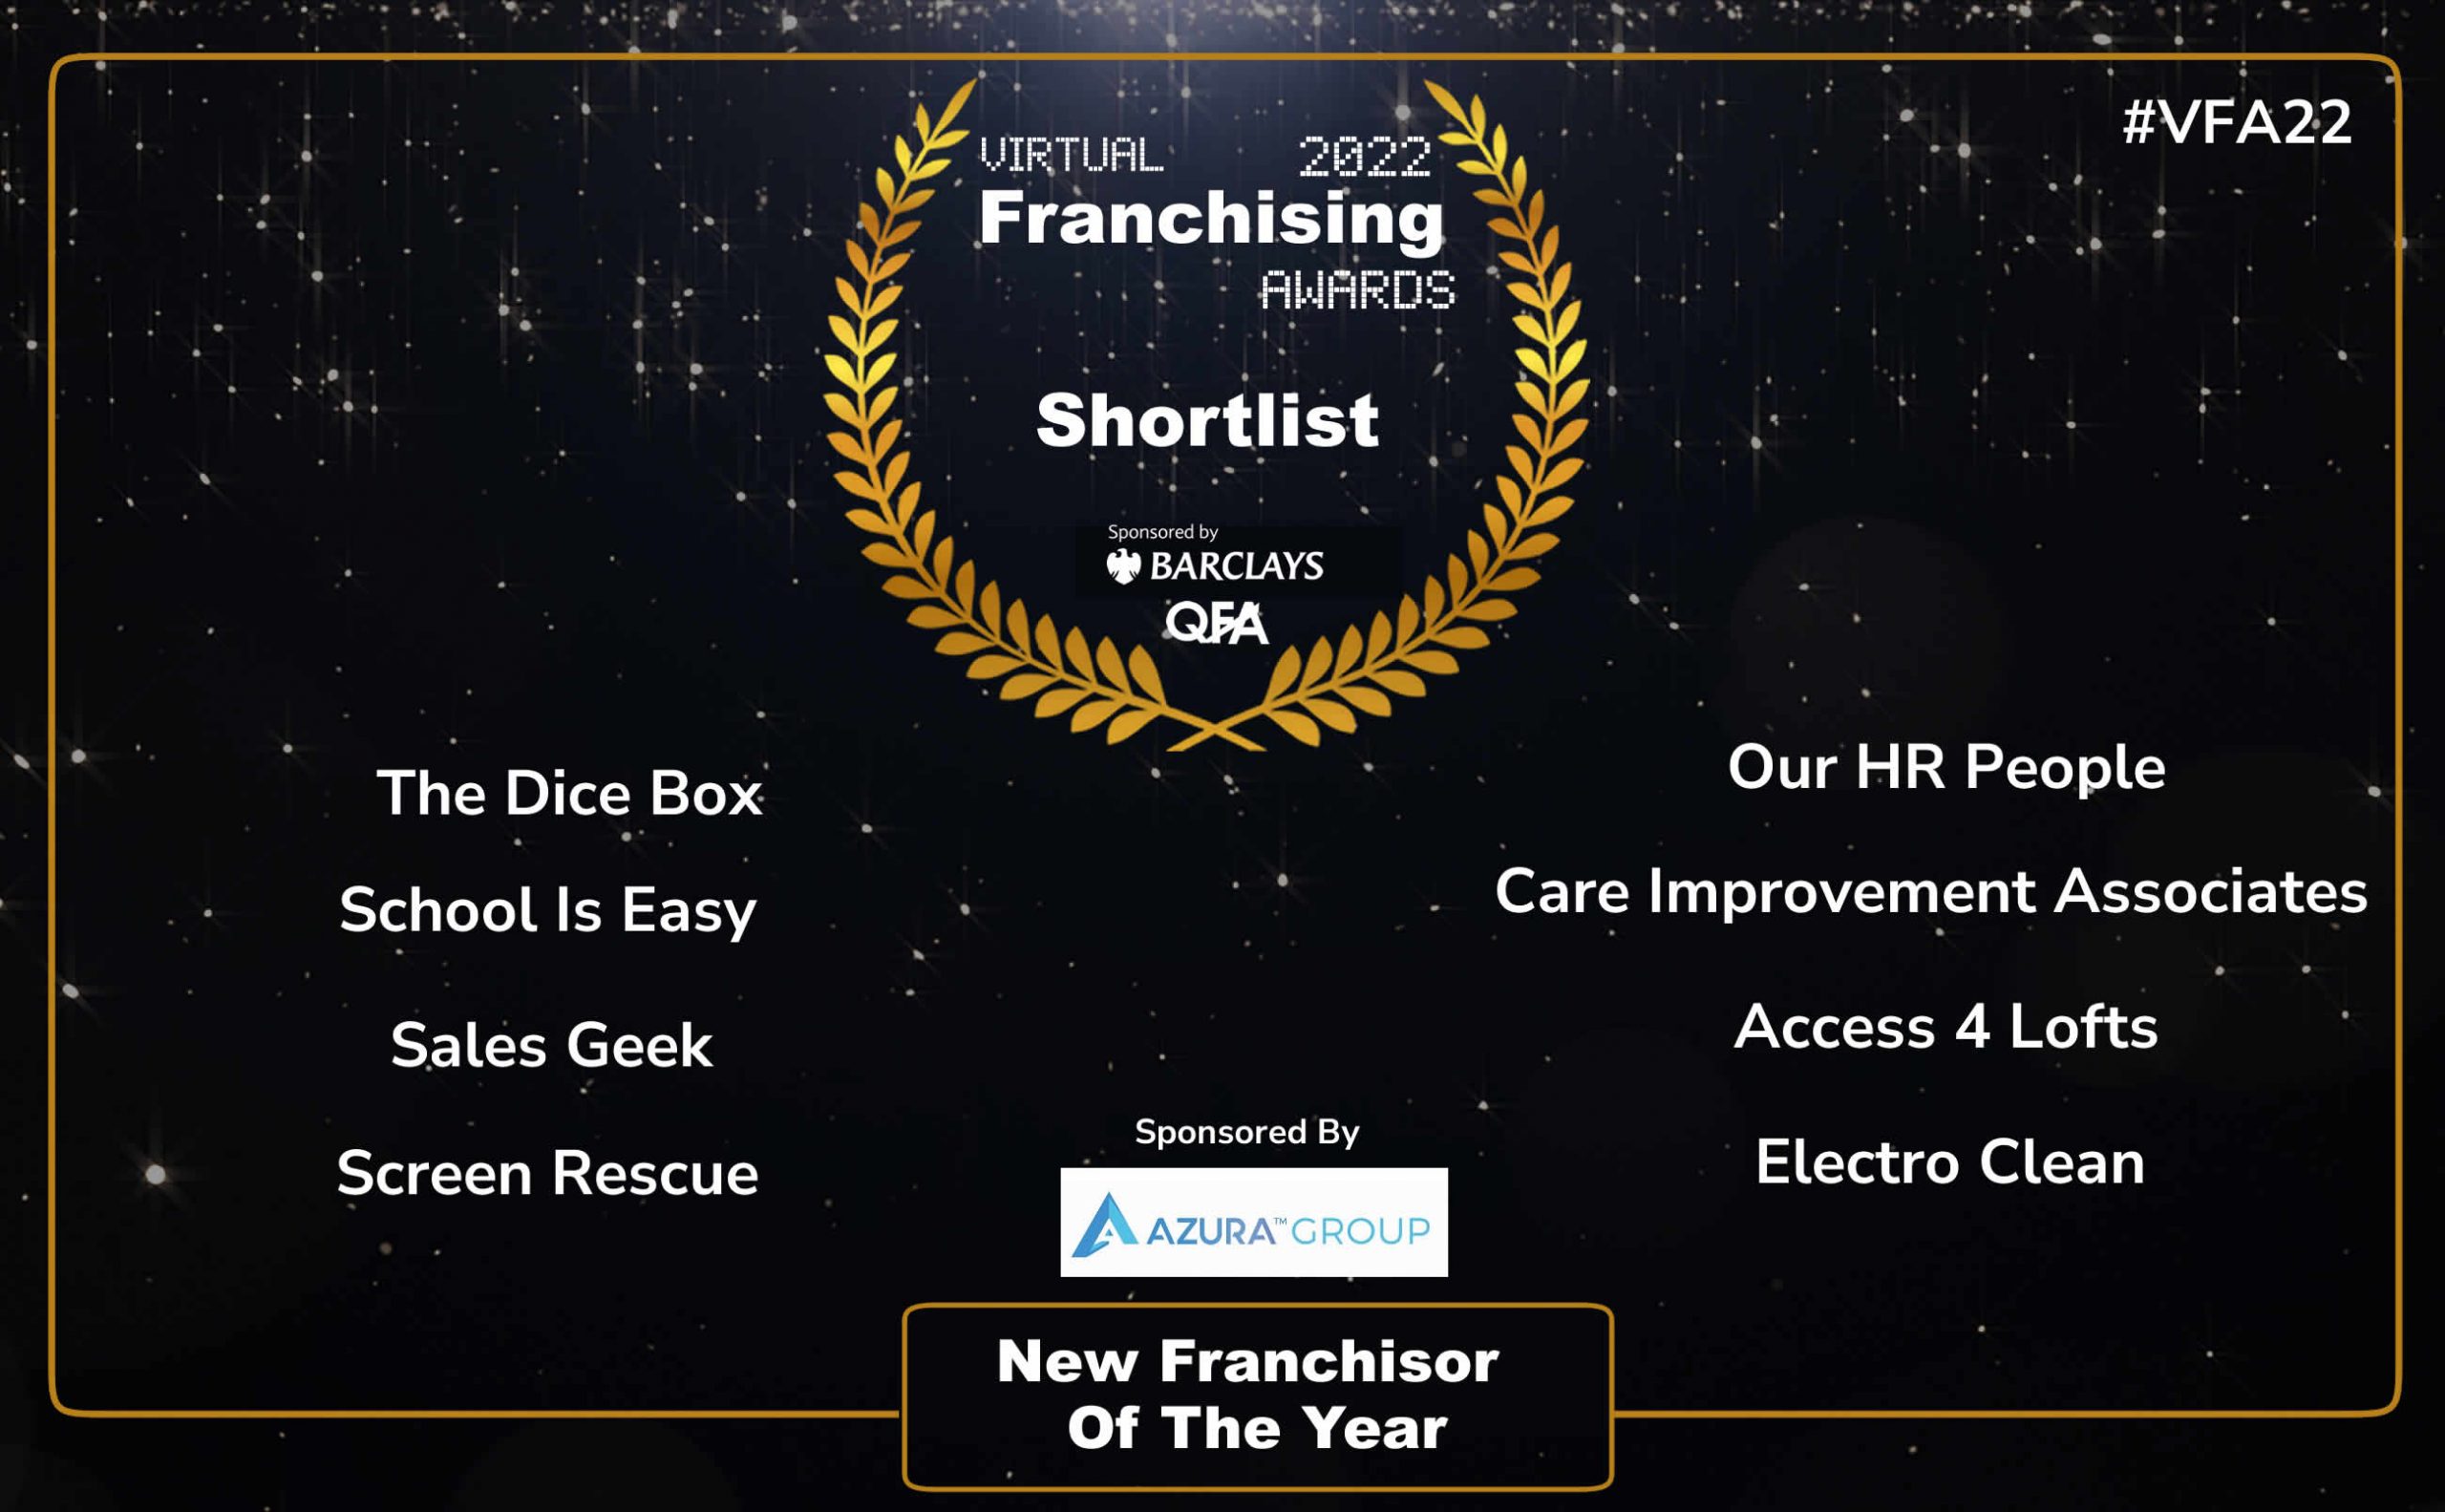 New Franchisor of the Year